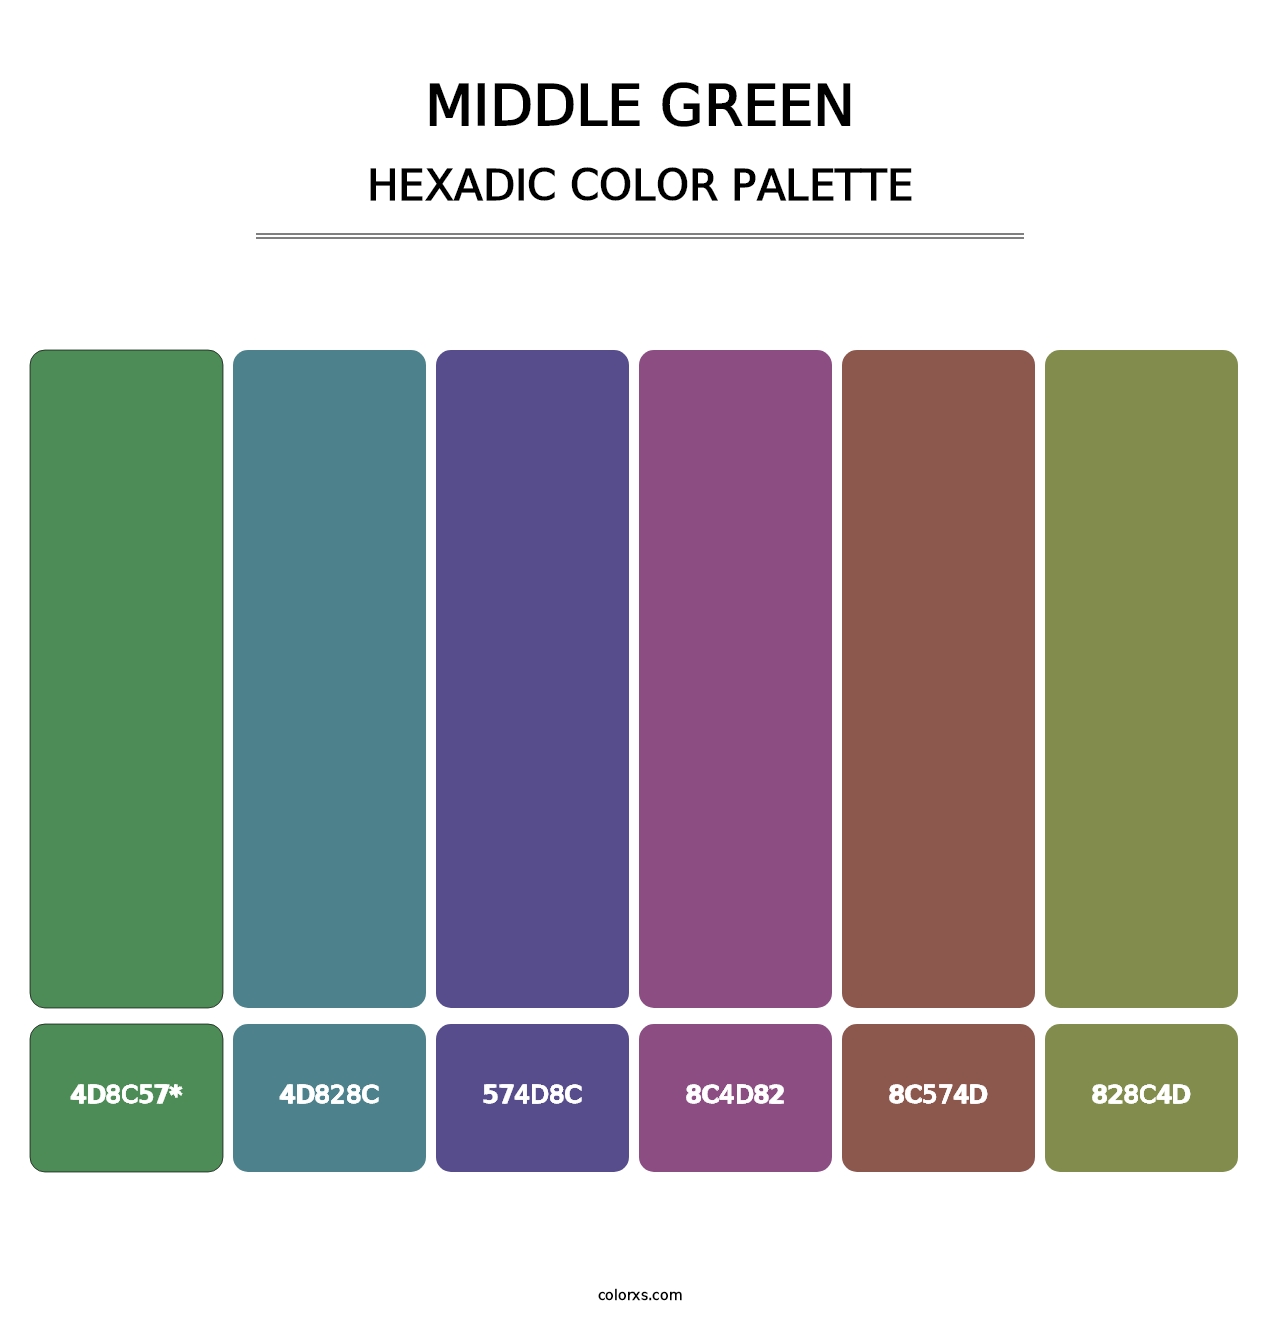 Middle Green - Hexadic Color Palette